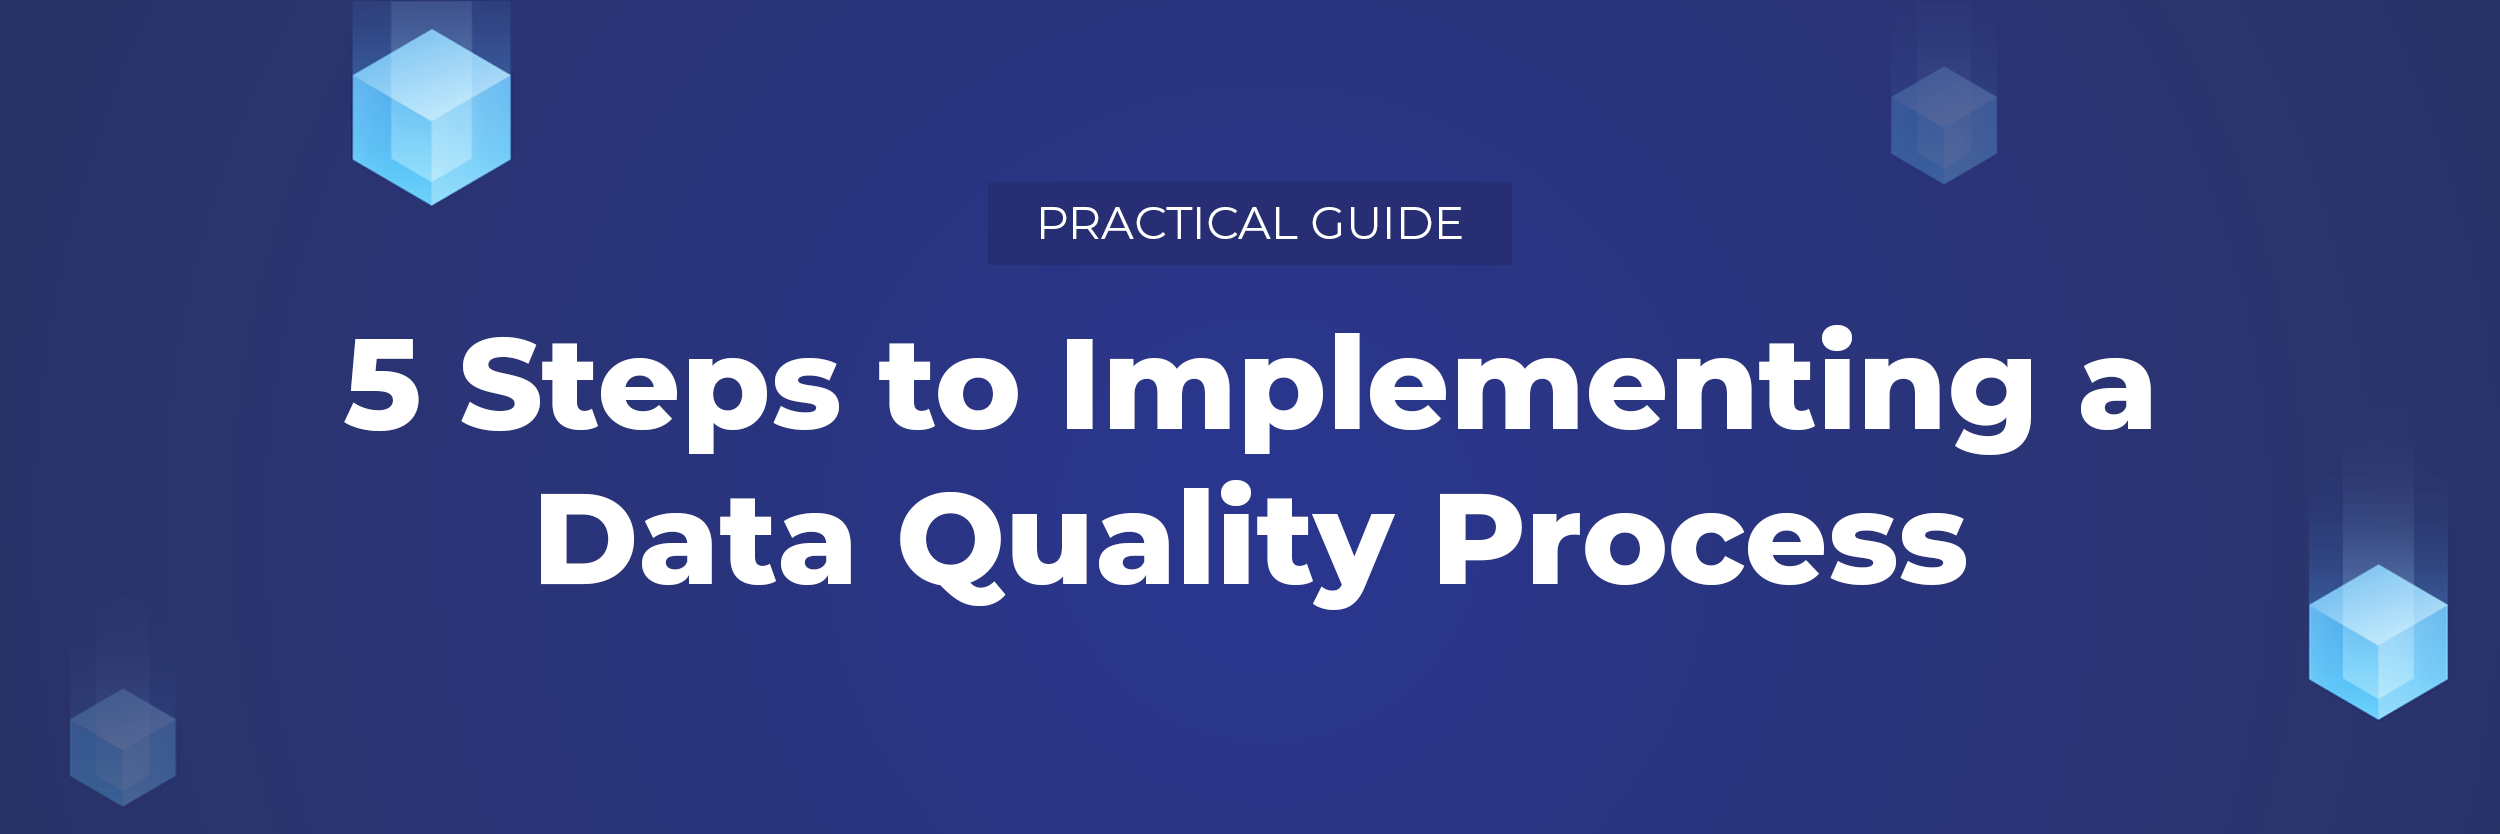 5 Steps to Implementing a Data Quality Process